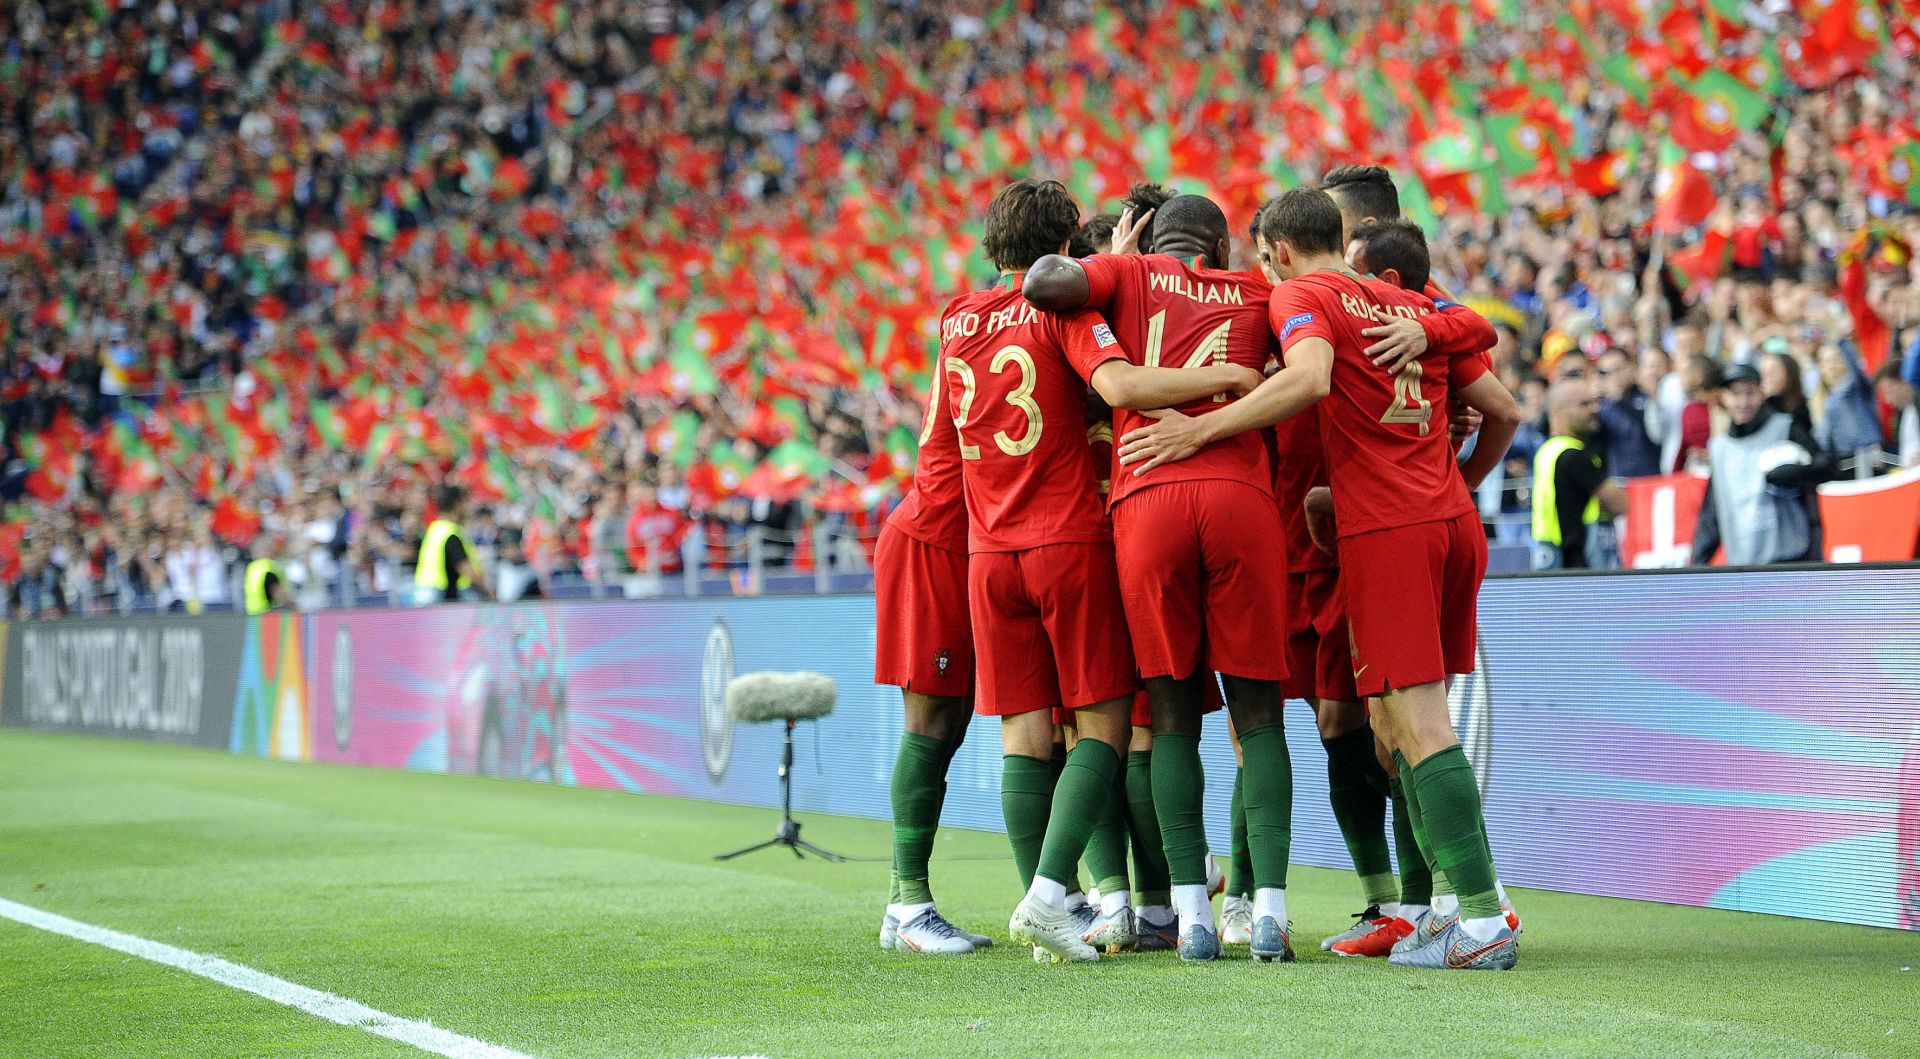 epa07628394 Portuguese players celebrate their 1-0 lead during the UEFA Nations League semi final soccer match between Portugal and Switzerland at Dragao stadium in Porto, Portugal, 05 June 2019.  EPA/FERNANDO VELUDO